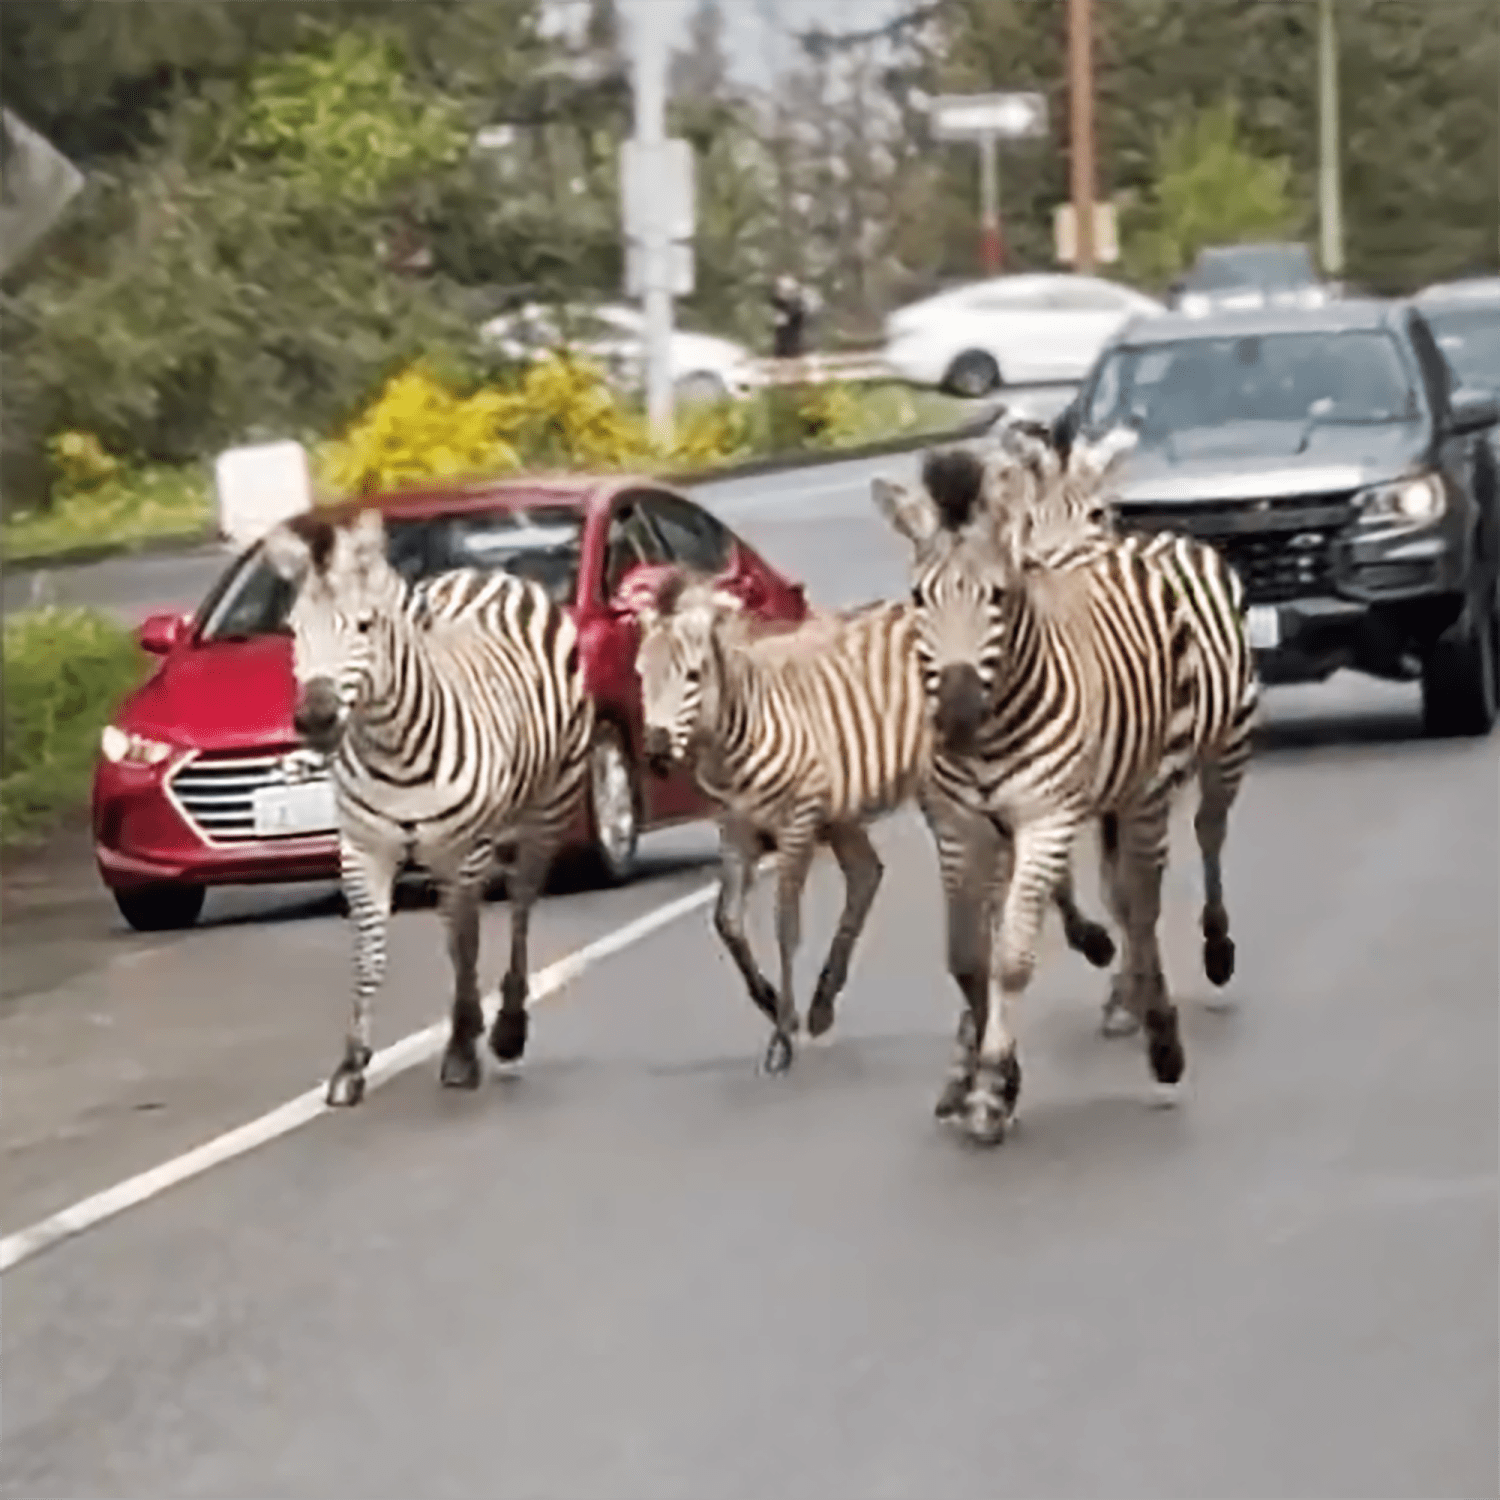 Police and public capture runaway zebras in Washington state, but one is still missing